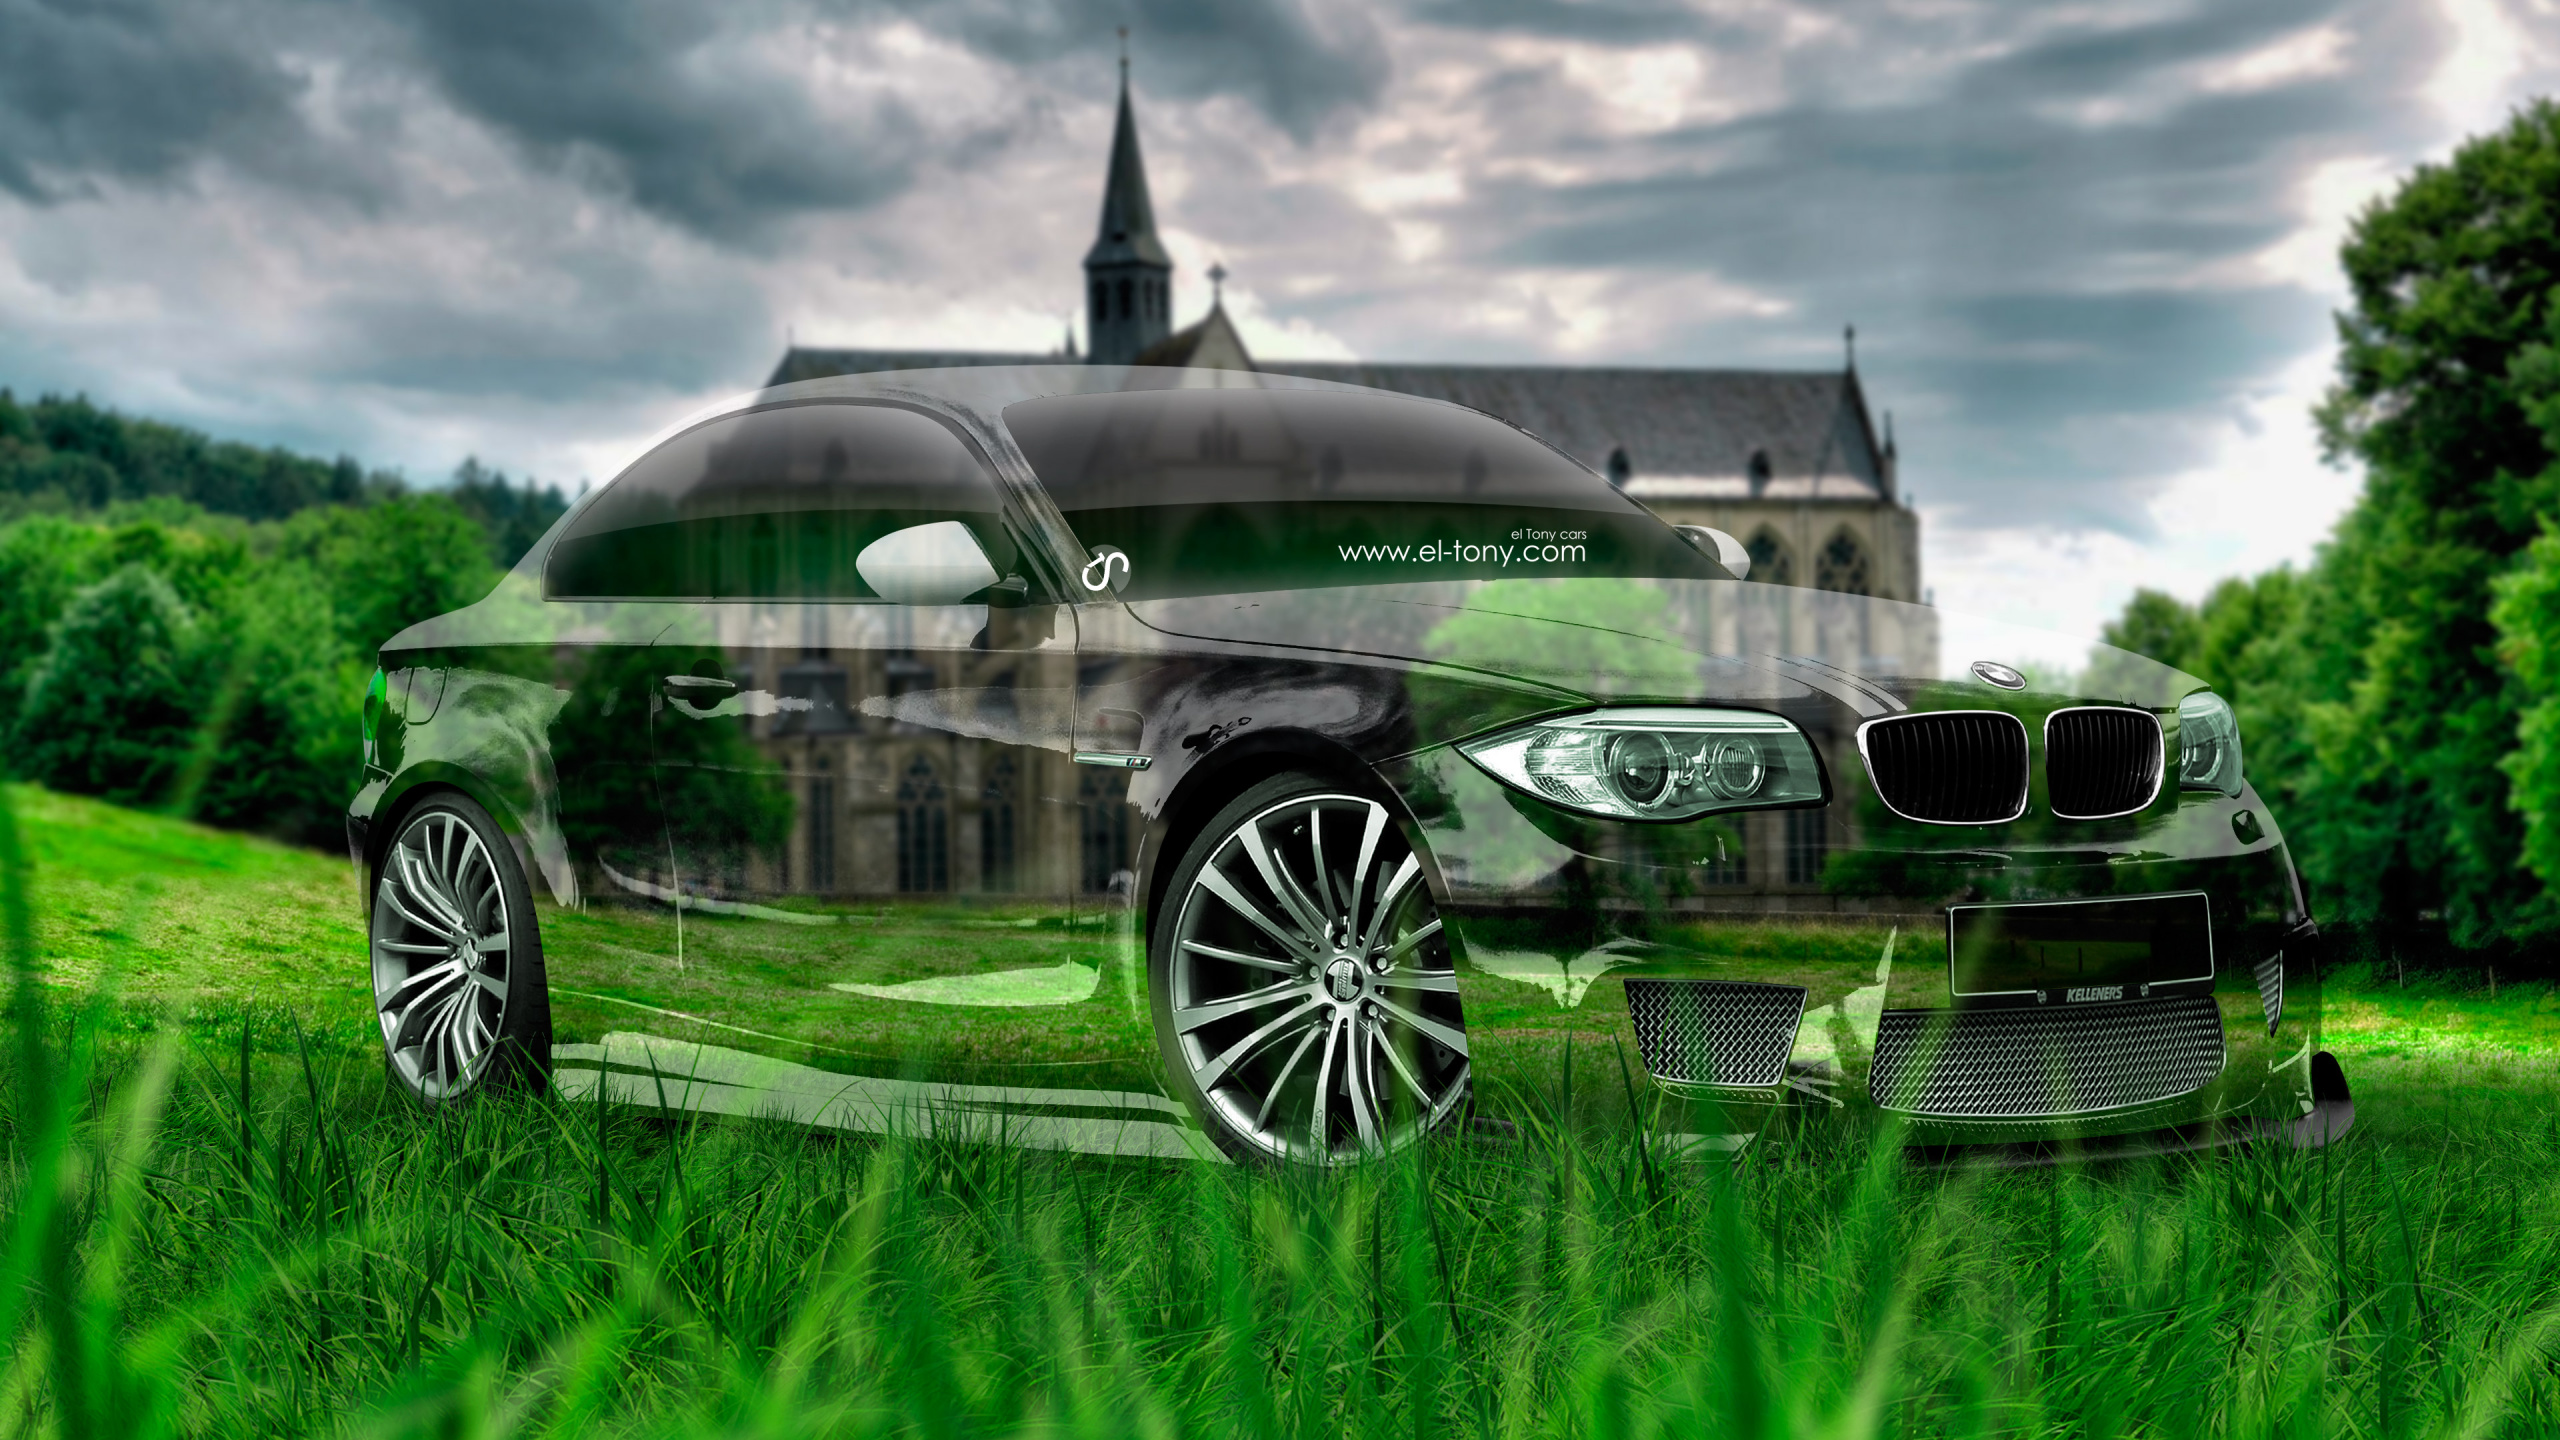 Green Mercedes Benz Coupe on Green Grass Field Near White and Gray Concrete Building During Daytime. Wallpaper in 2560x1440 Resolution